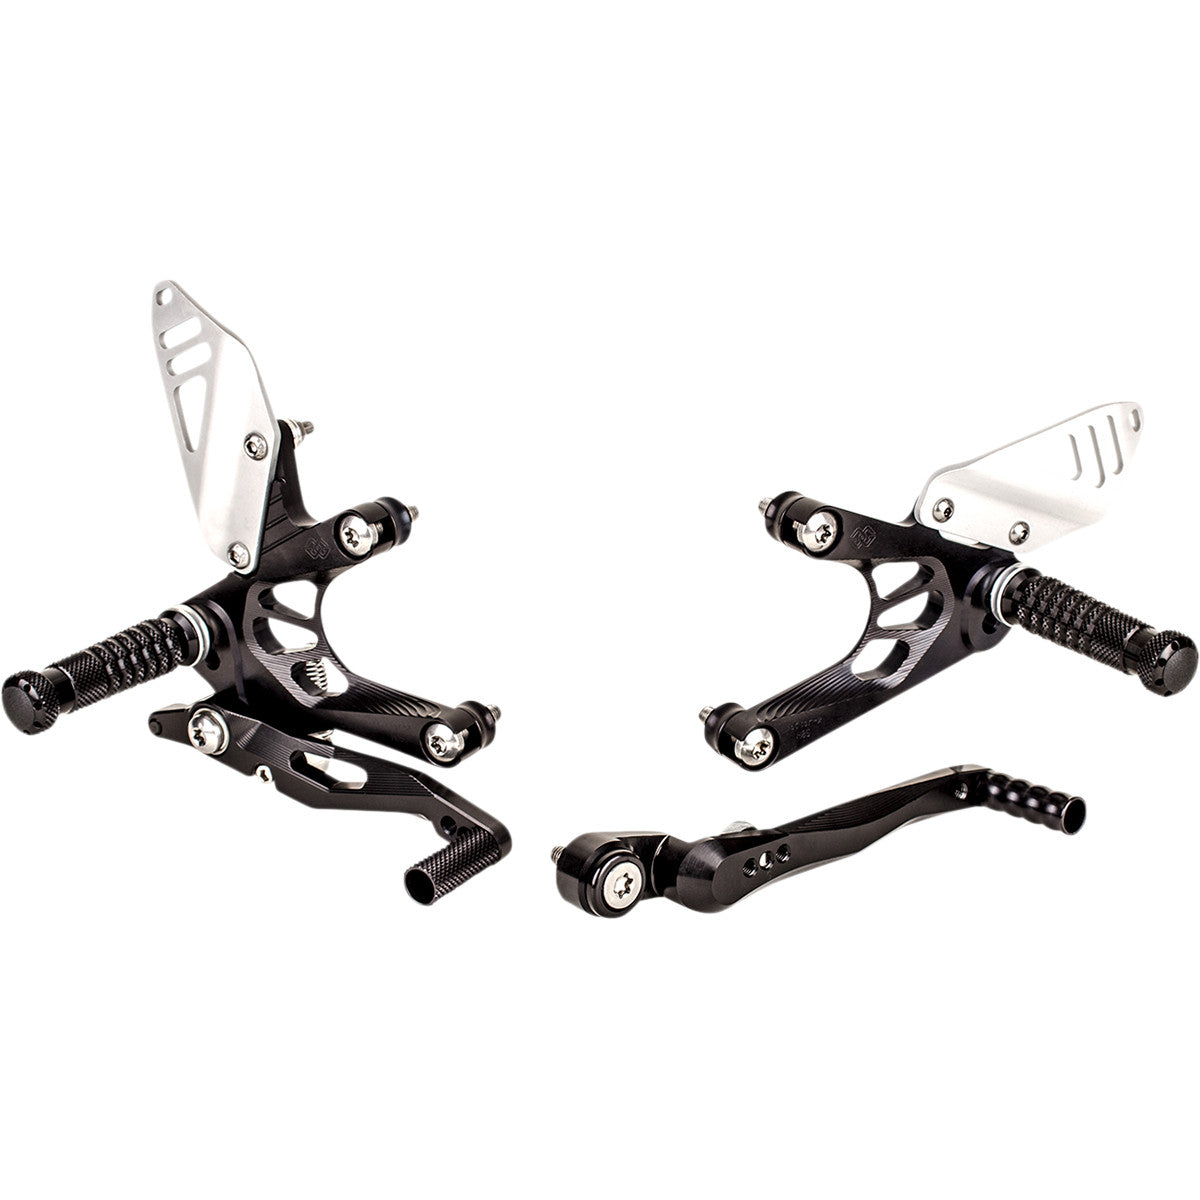 Factor-X Rearsets For Honda